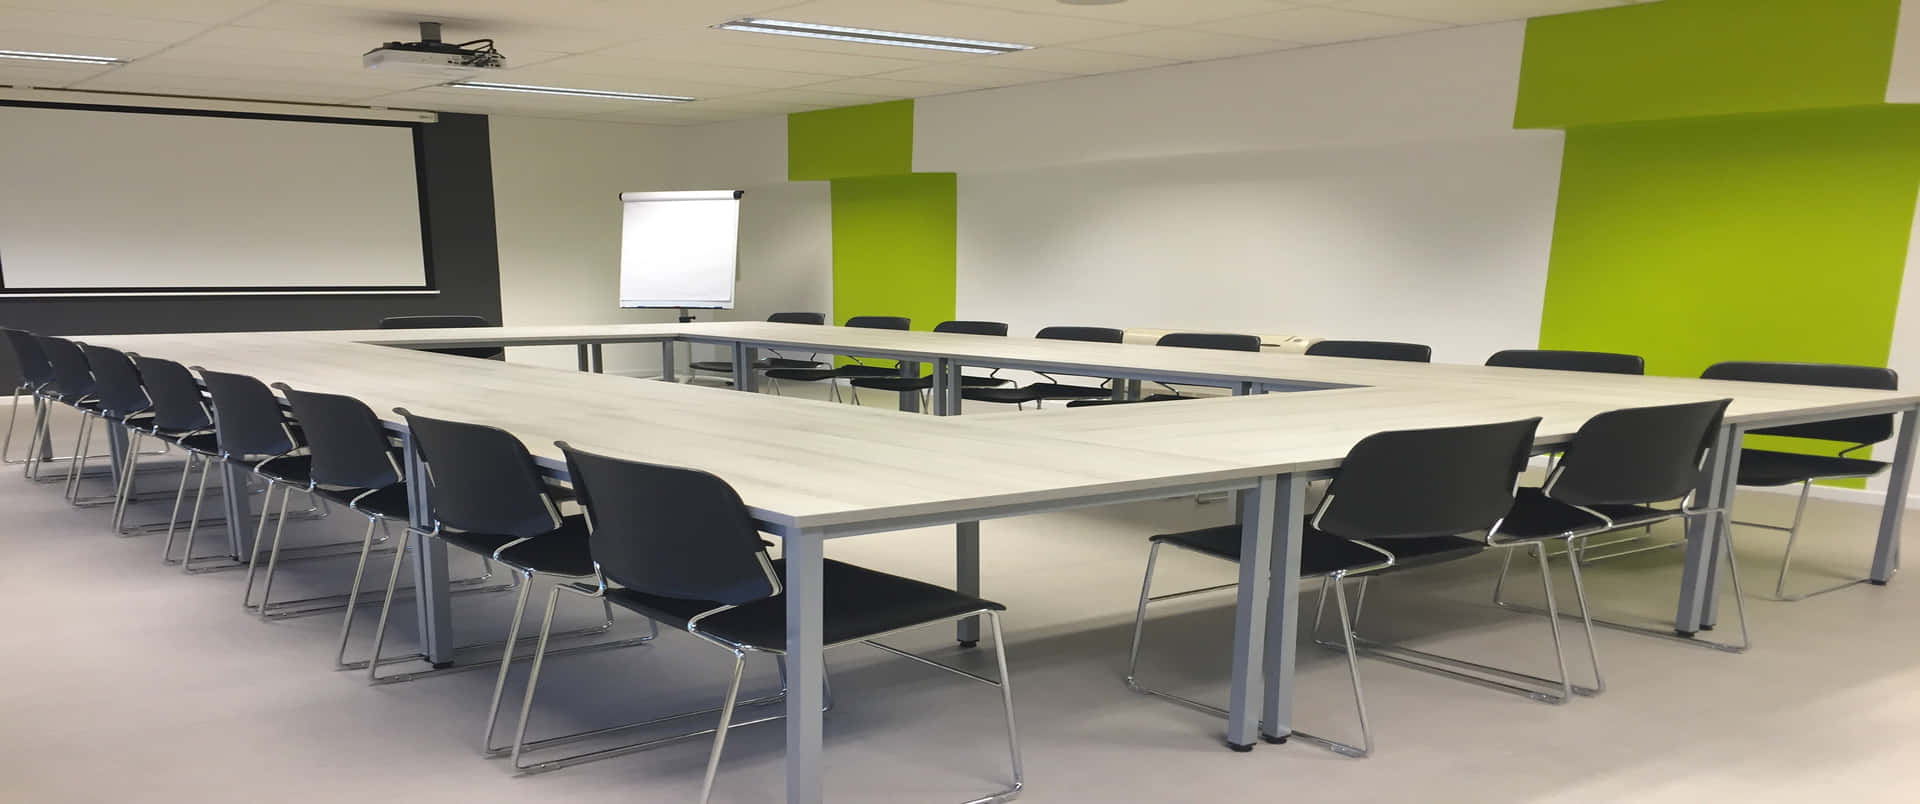 Simple 3440x1440p Office Background With Wide Boardroom Table